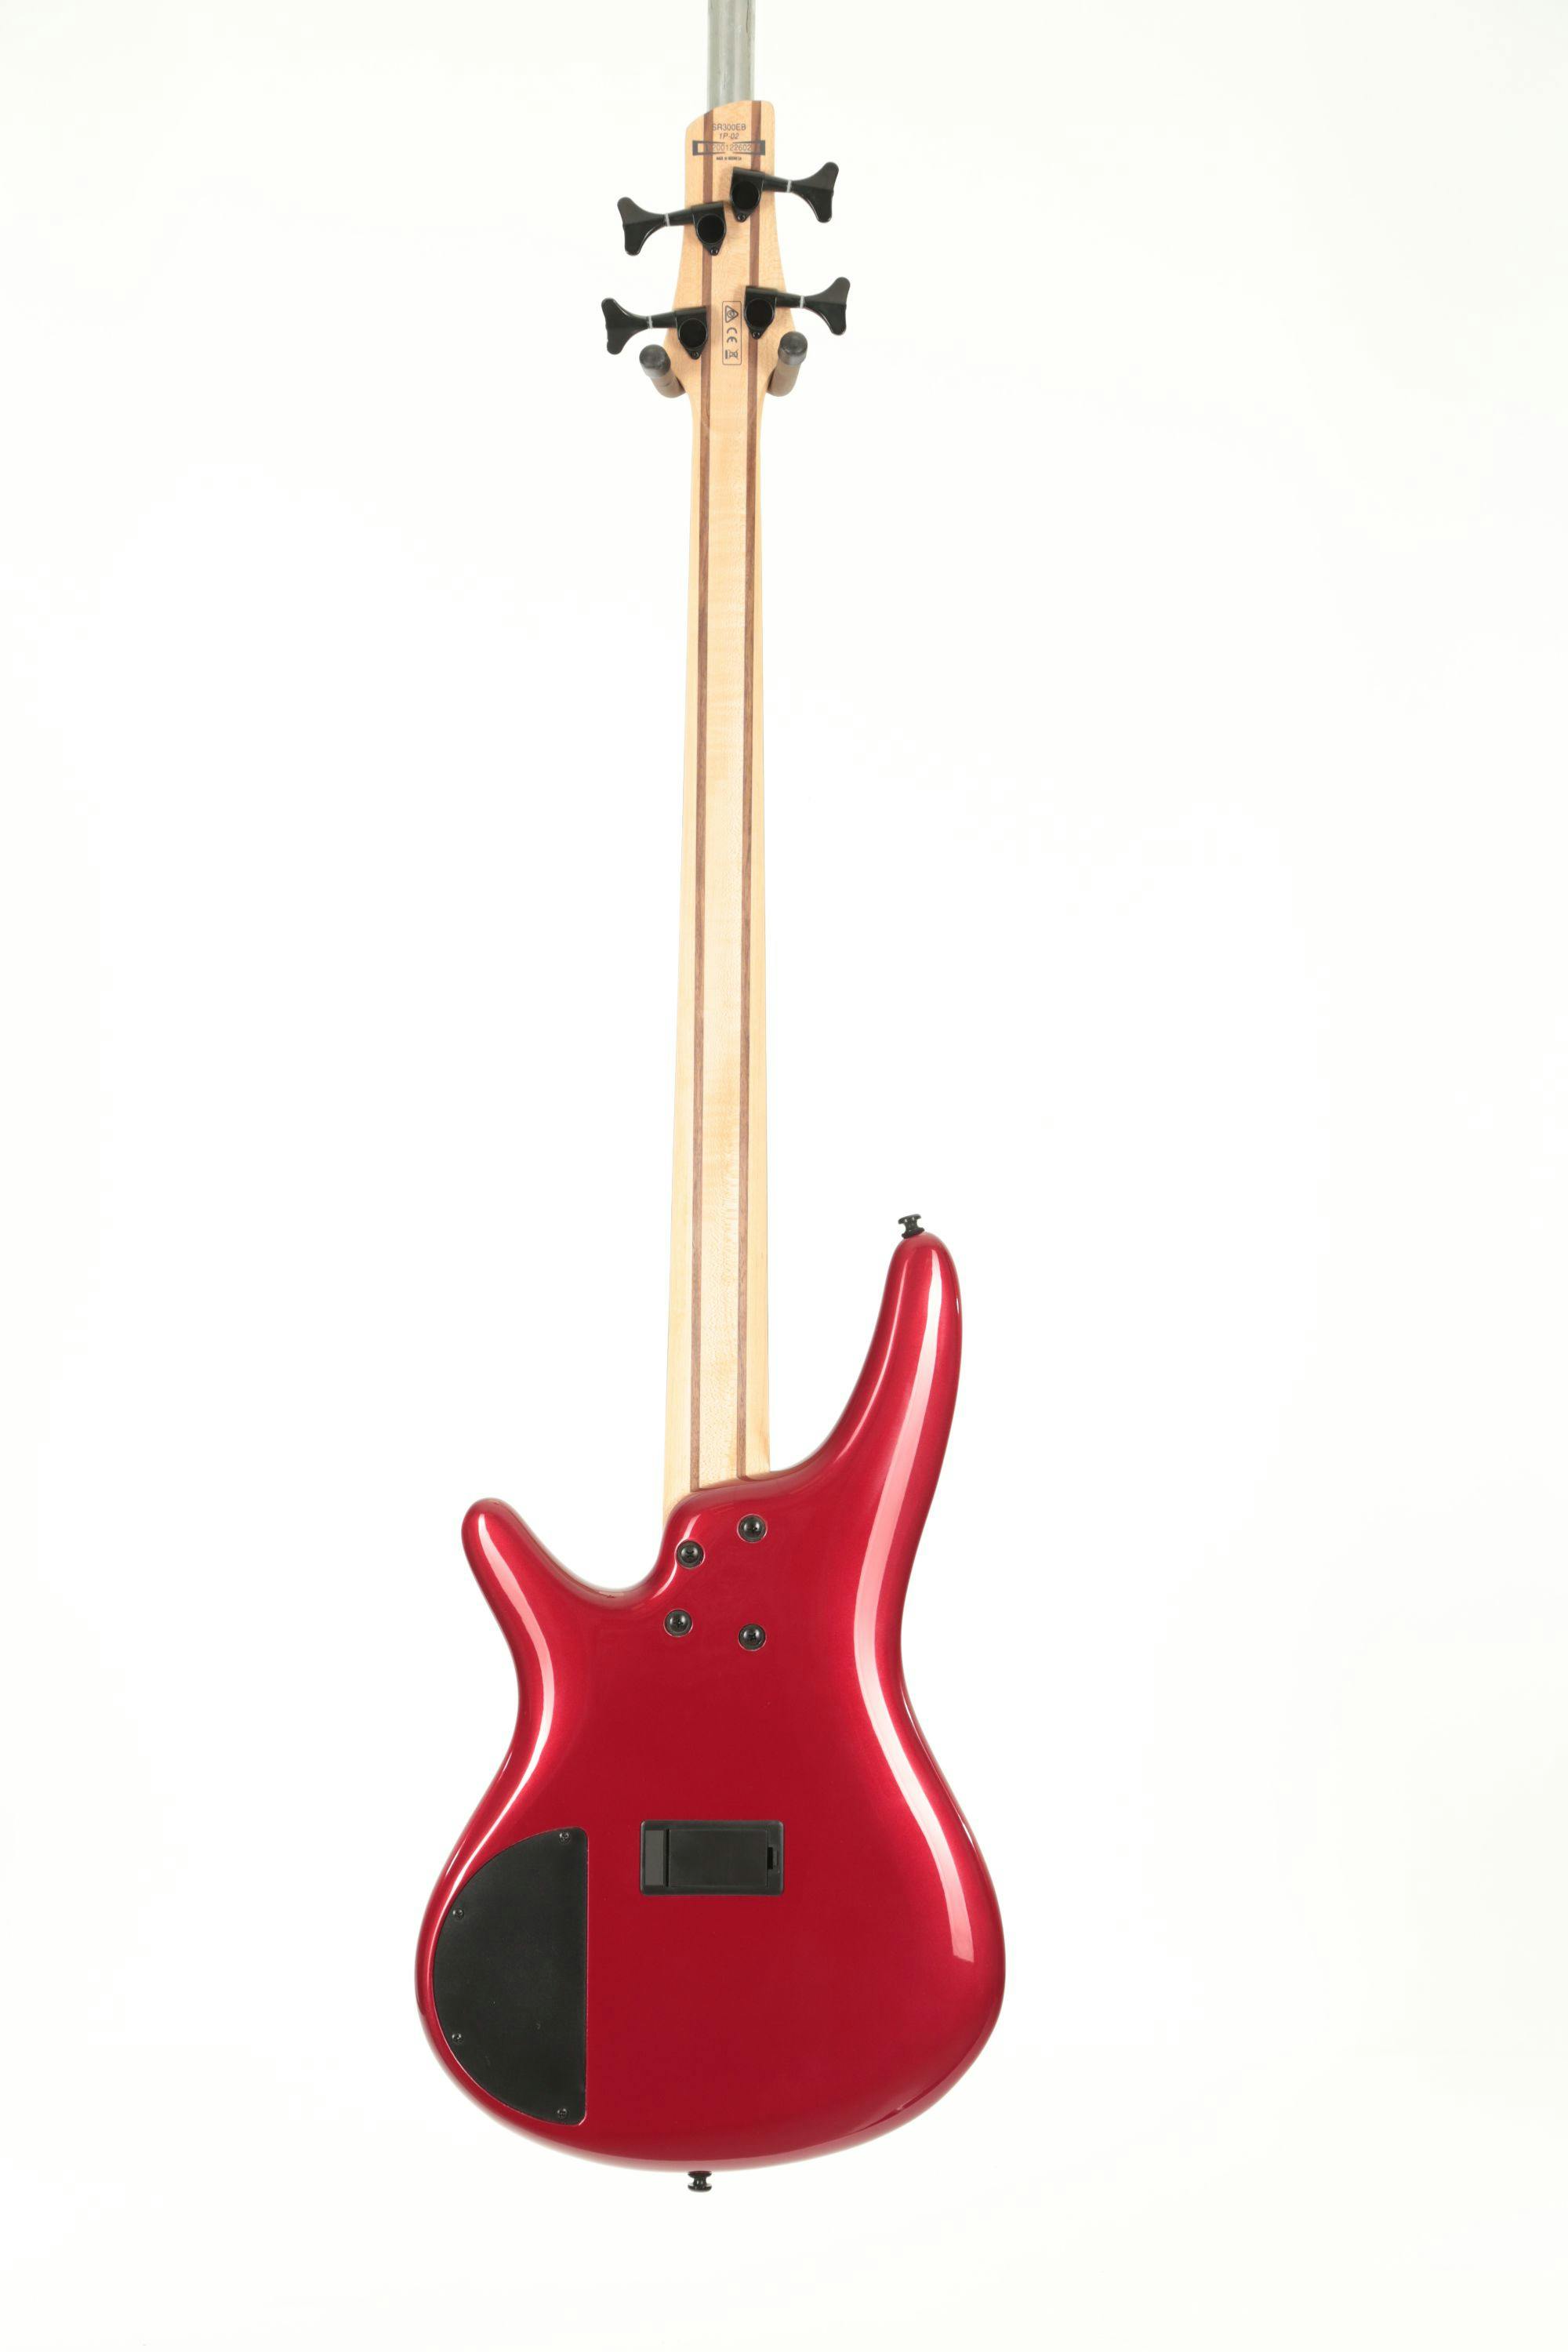 B-Stock Ibanez SR300EB-CA Bass in Candy Apple Red - Andertons